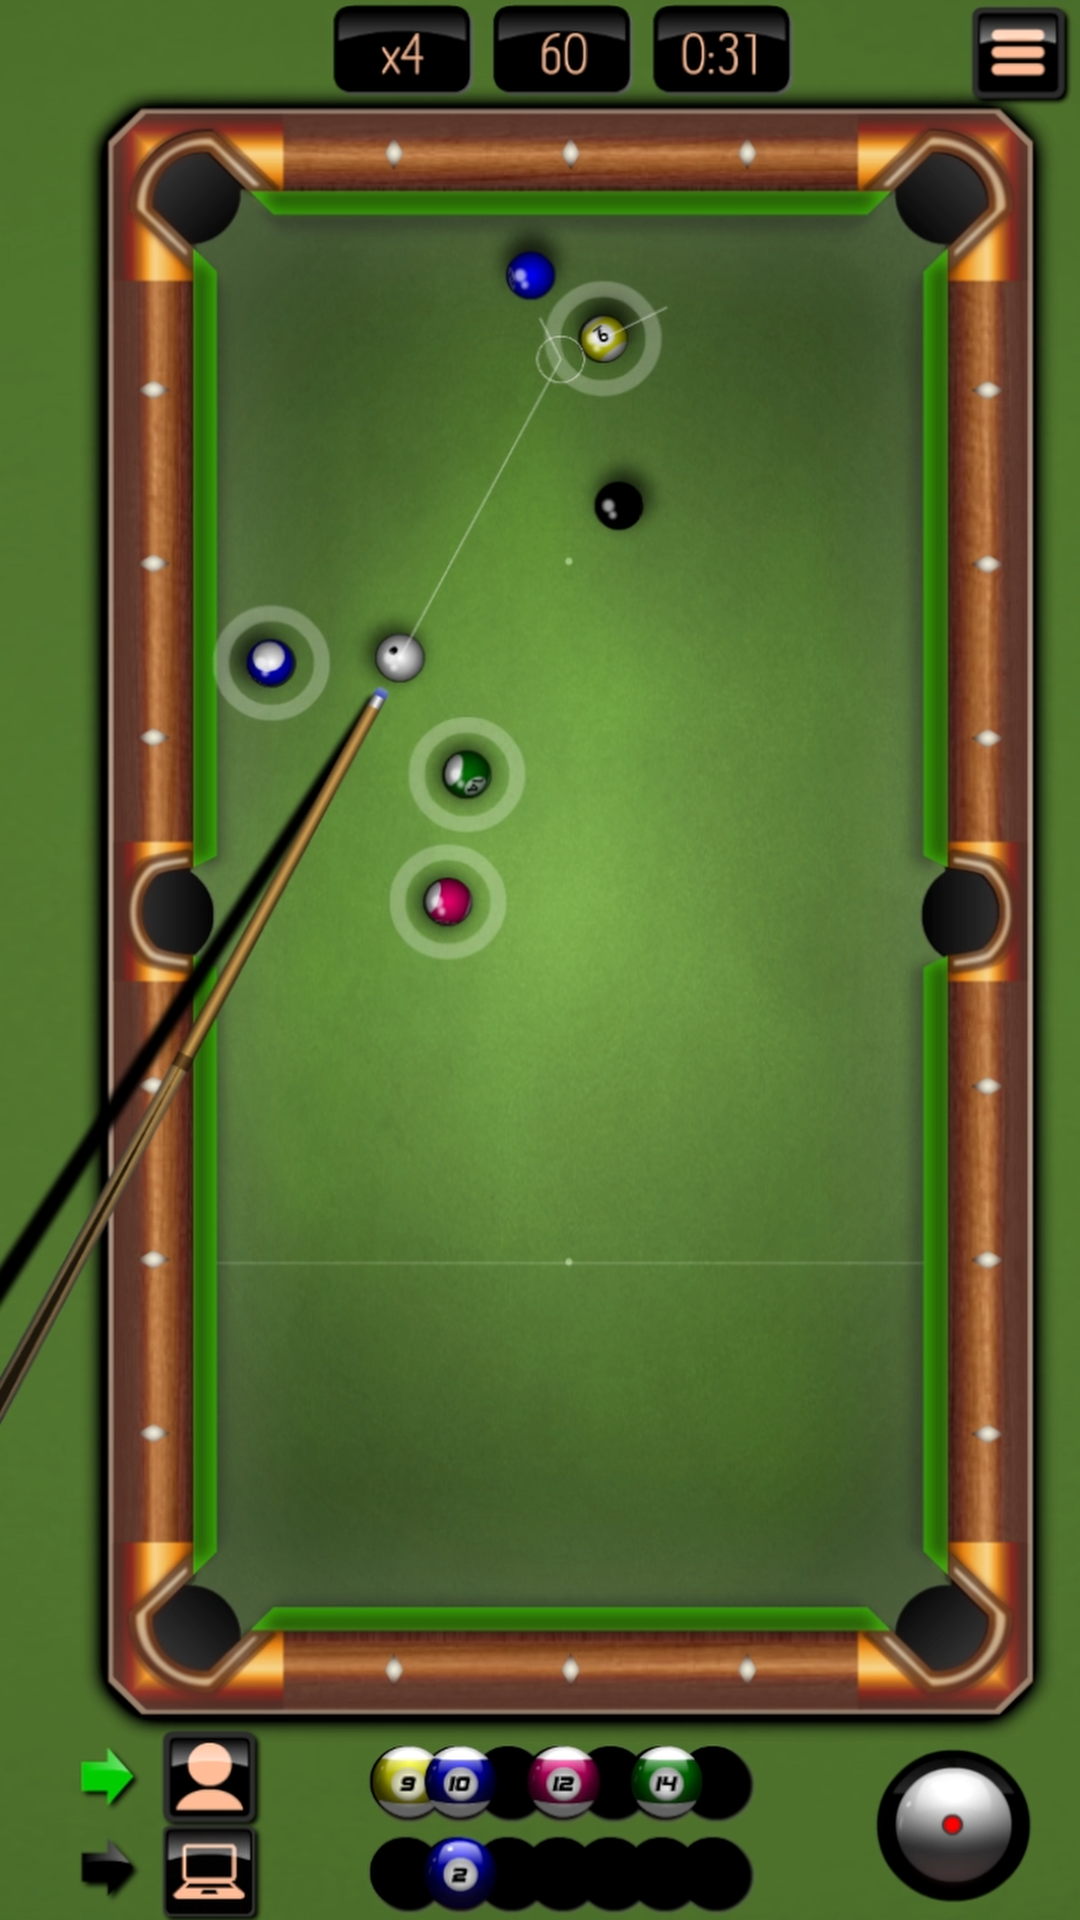 Play 8 Ball Billiards Classic Game Here - A Billiards Game on